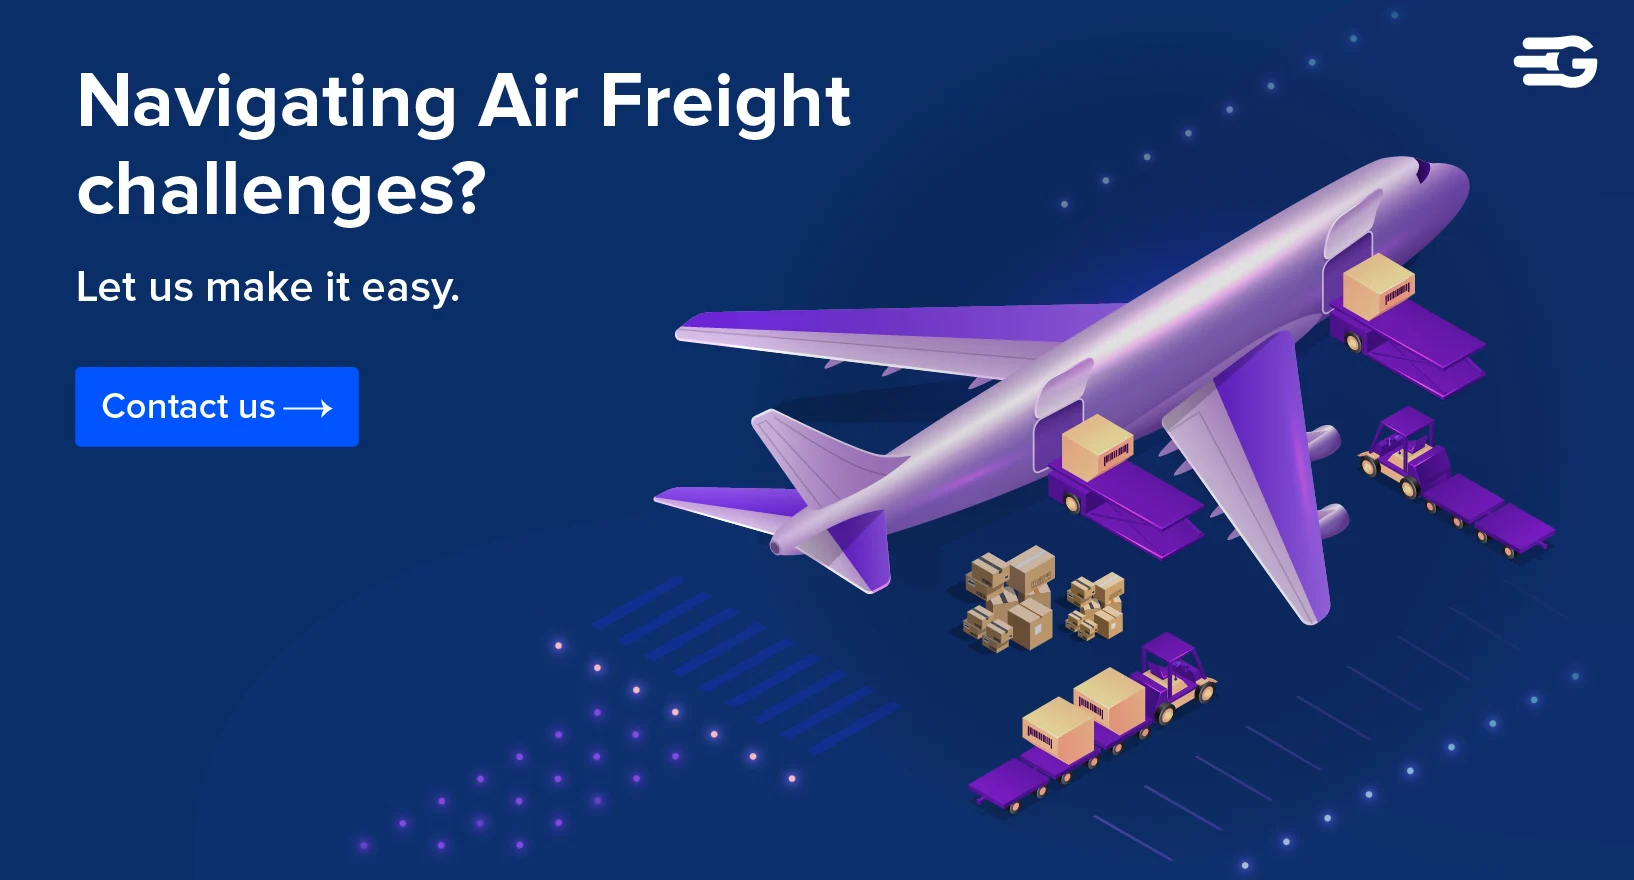 Navigating Air Freight challenges?

Contact Us!